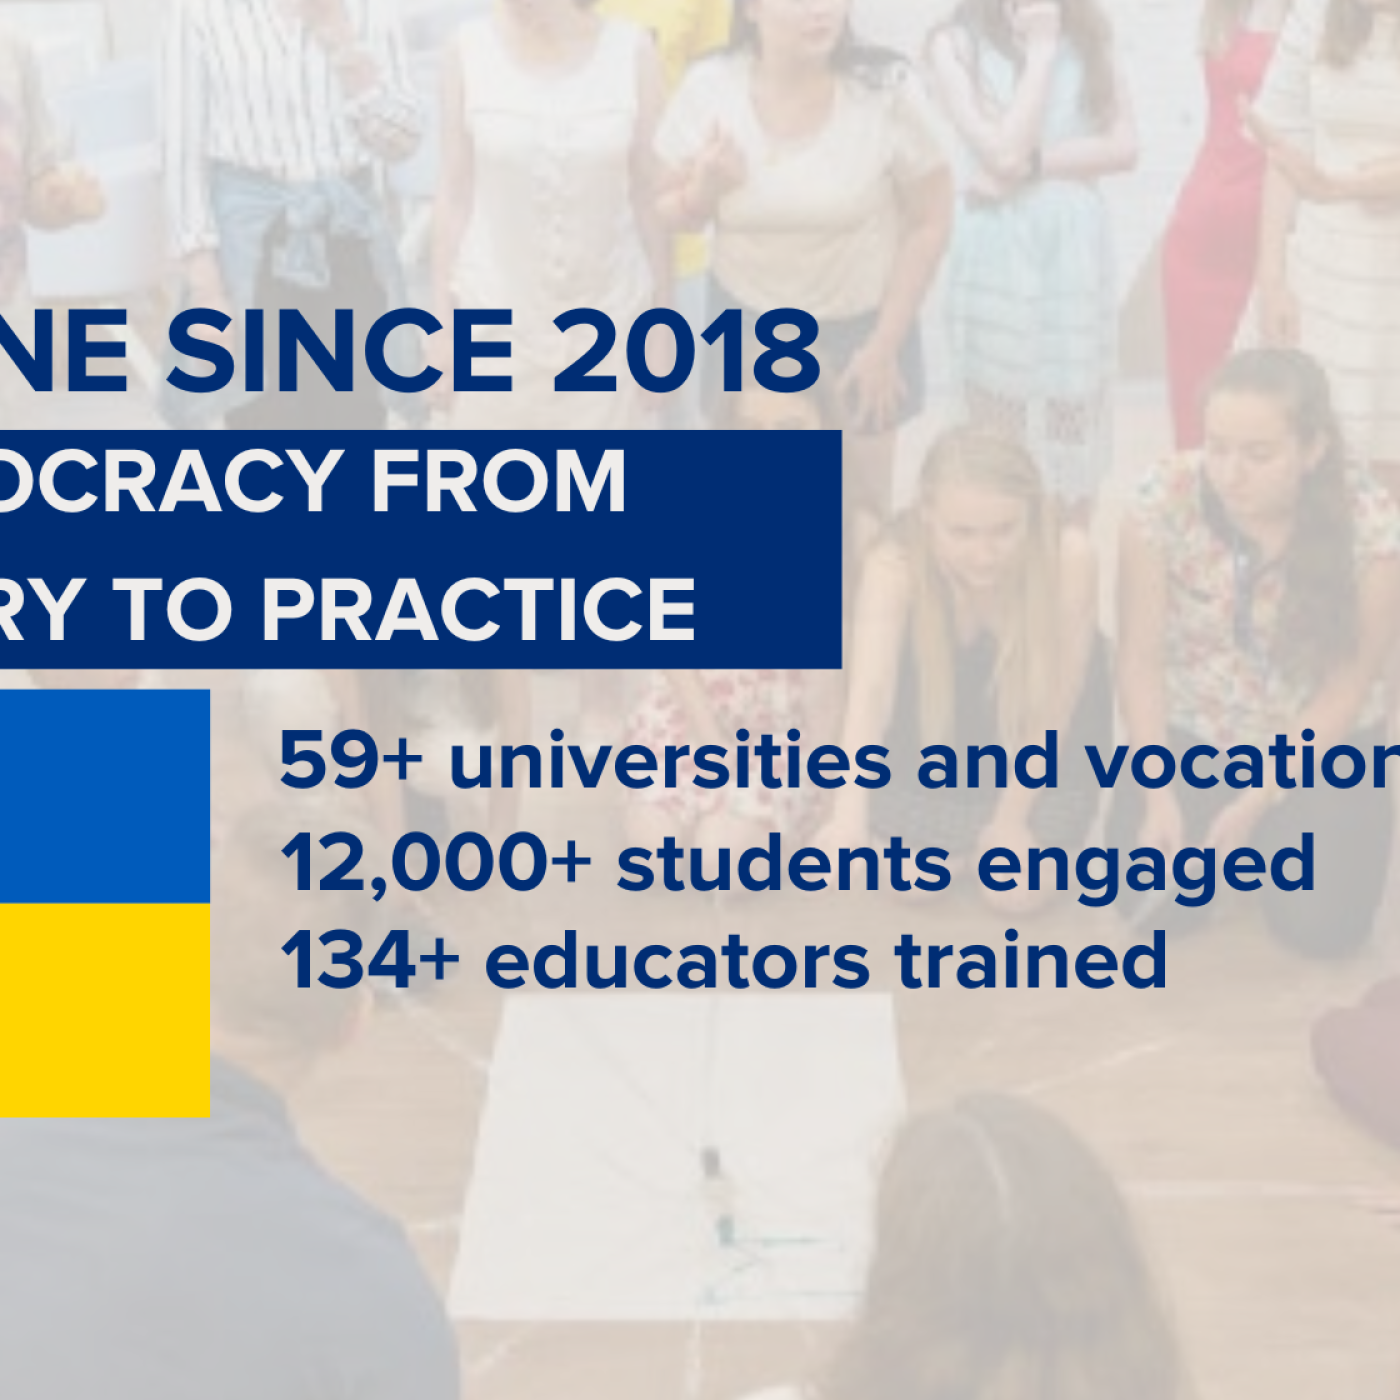 Ukraine Since 2018 Democracy from Theory to Practice, 59+ universities and vocational schools, 12,000 + Students Engaged, 134+ Educators trained